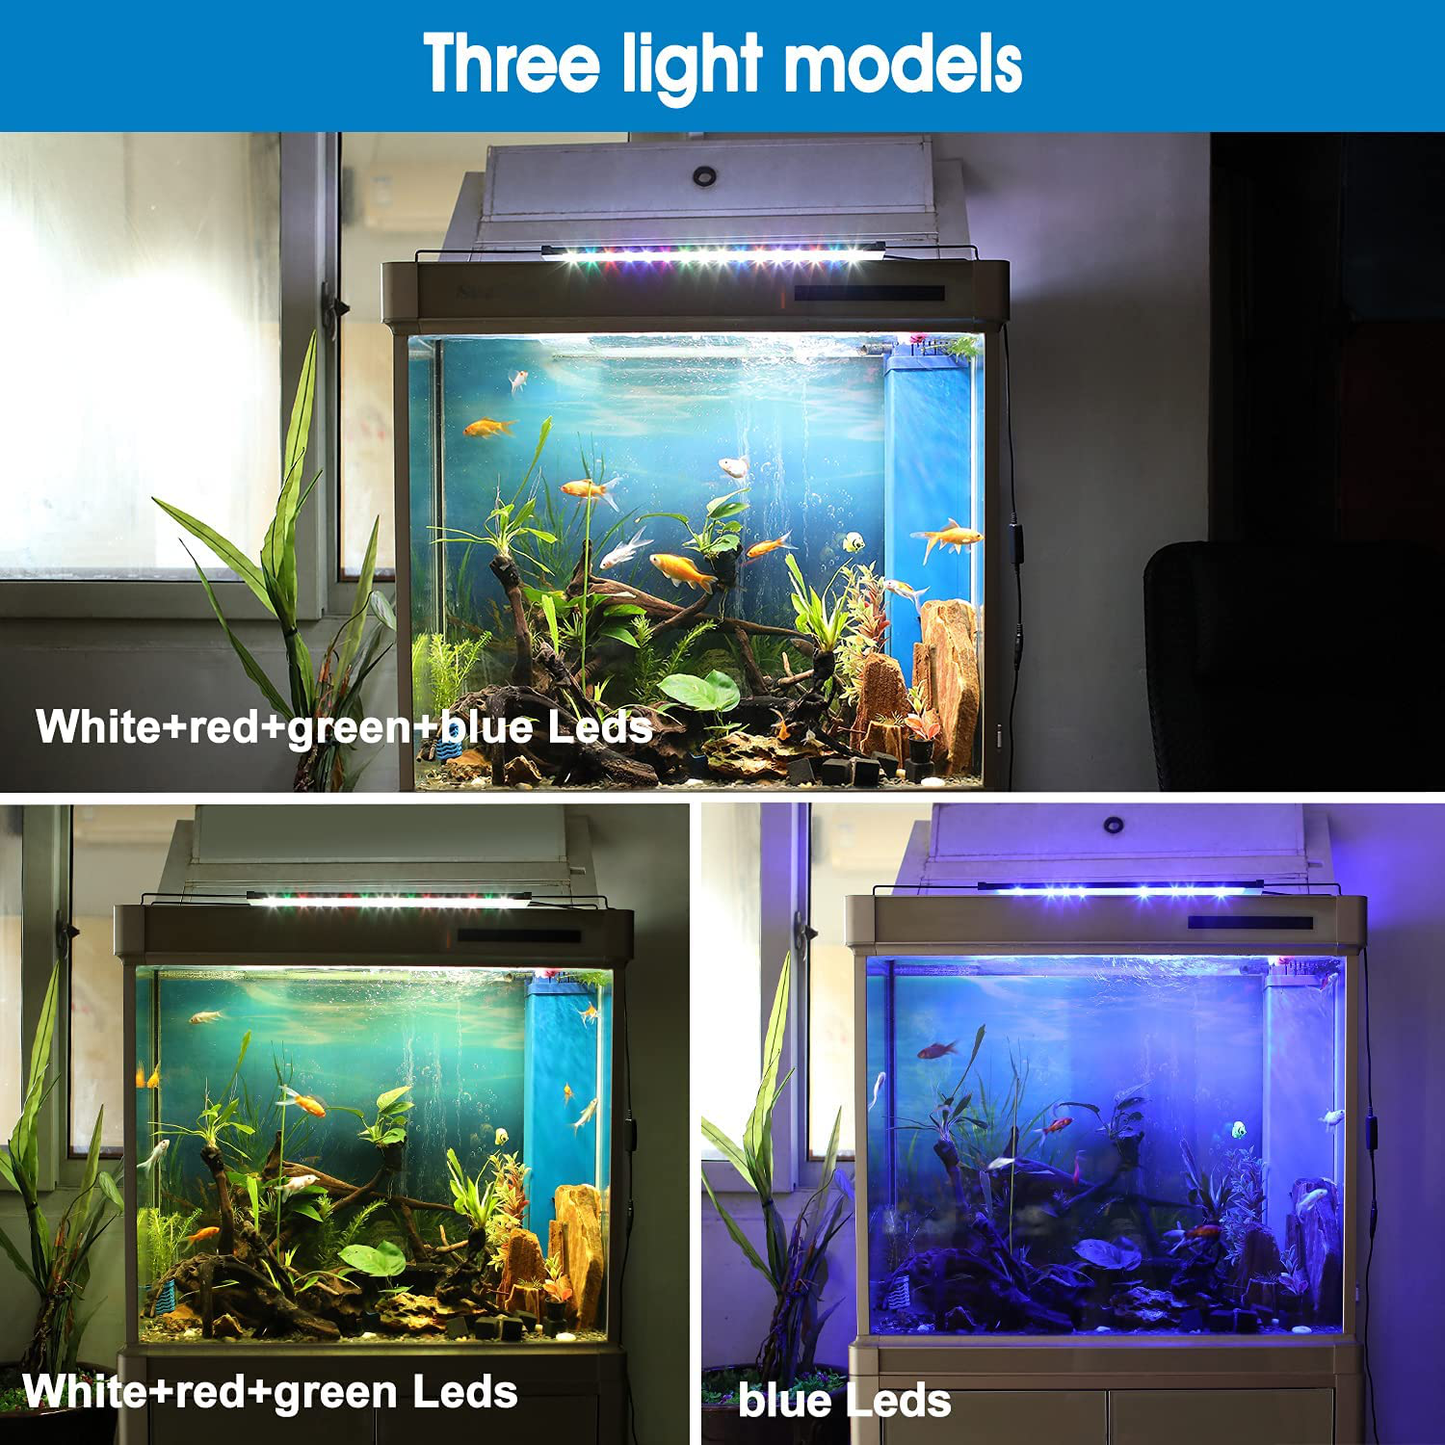 Riiai 12W Aquarium Light, LED Planted Fish Tank Light with Extendable Brackets for Freshwater Saltwater Tank 12-20 Inch, Aluminum Shell 4 Color Model Built-In Timer